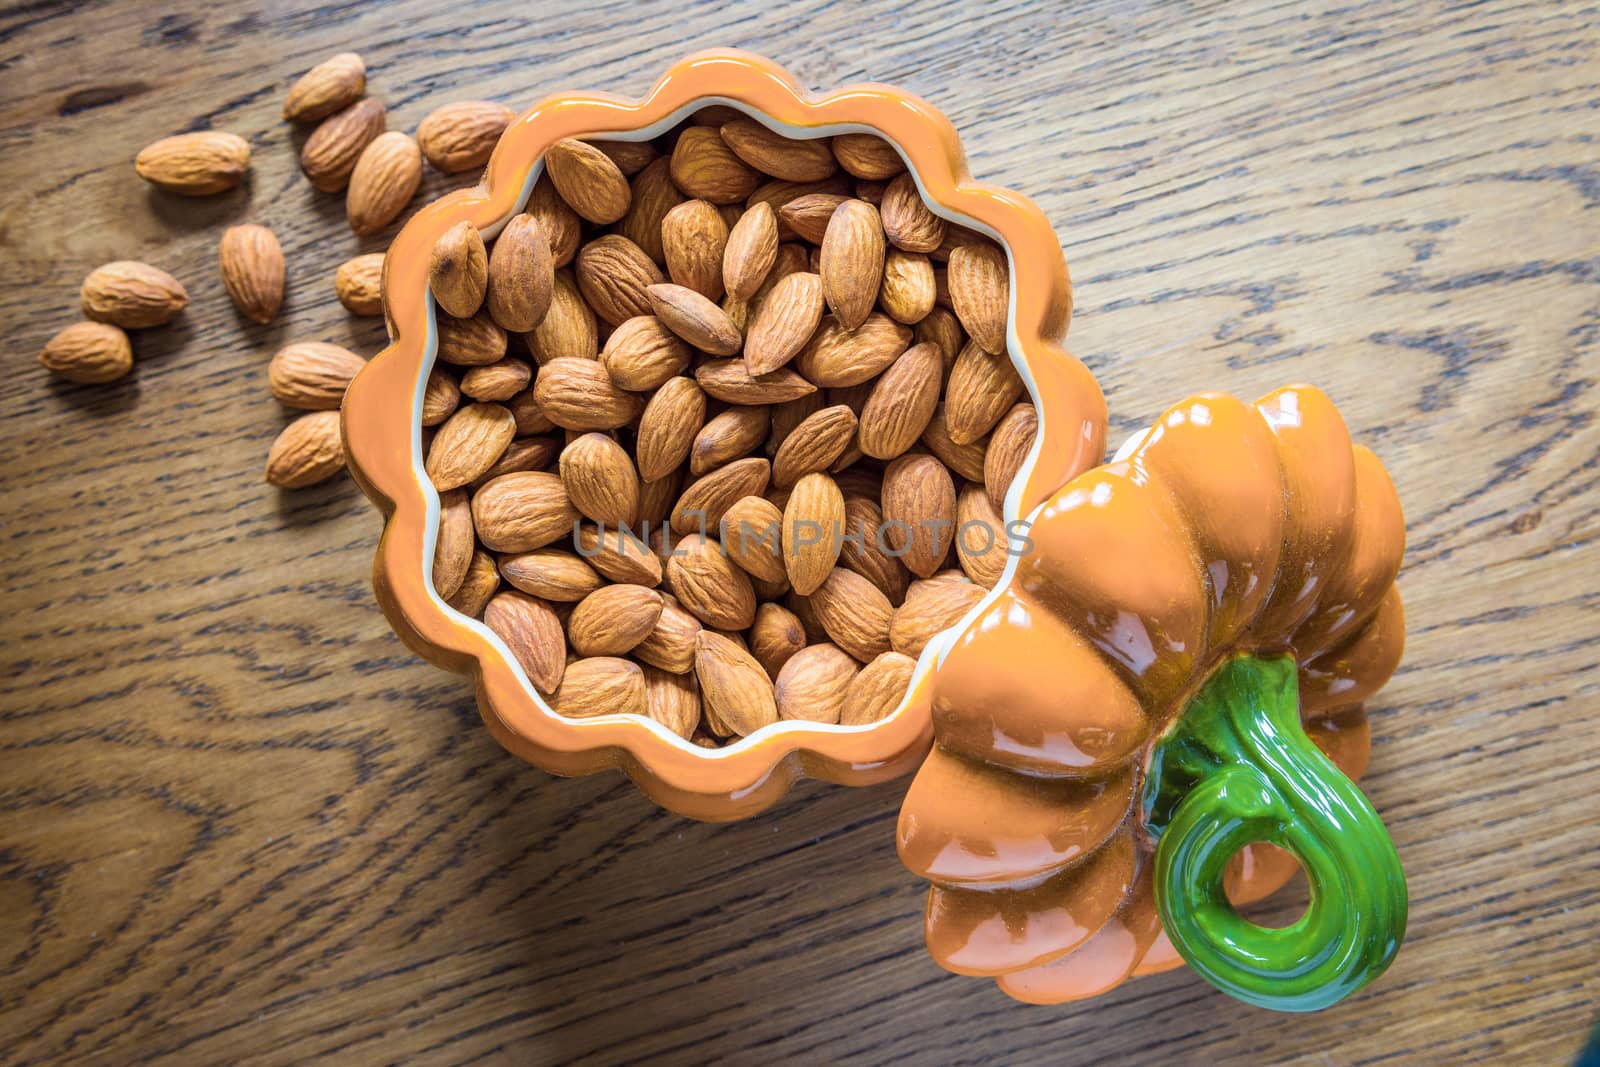 Almond nuts lie in an open ceramic bowl made in the shape of a pumpkin. 
